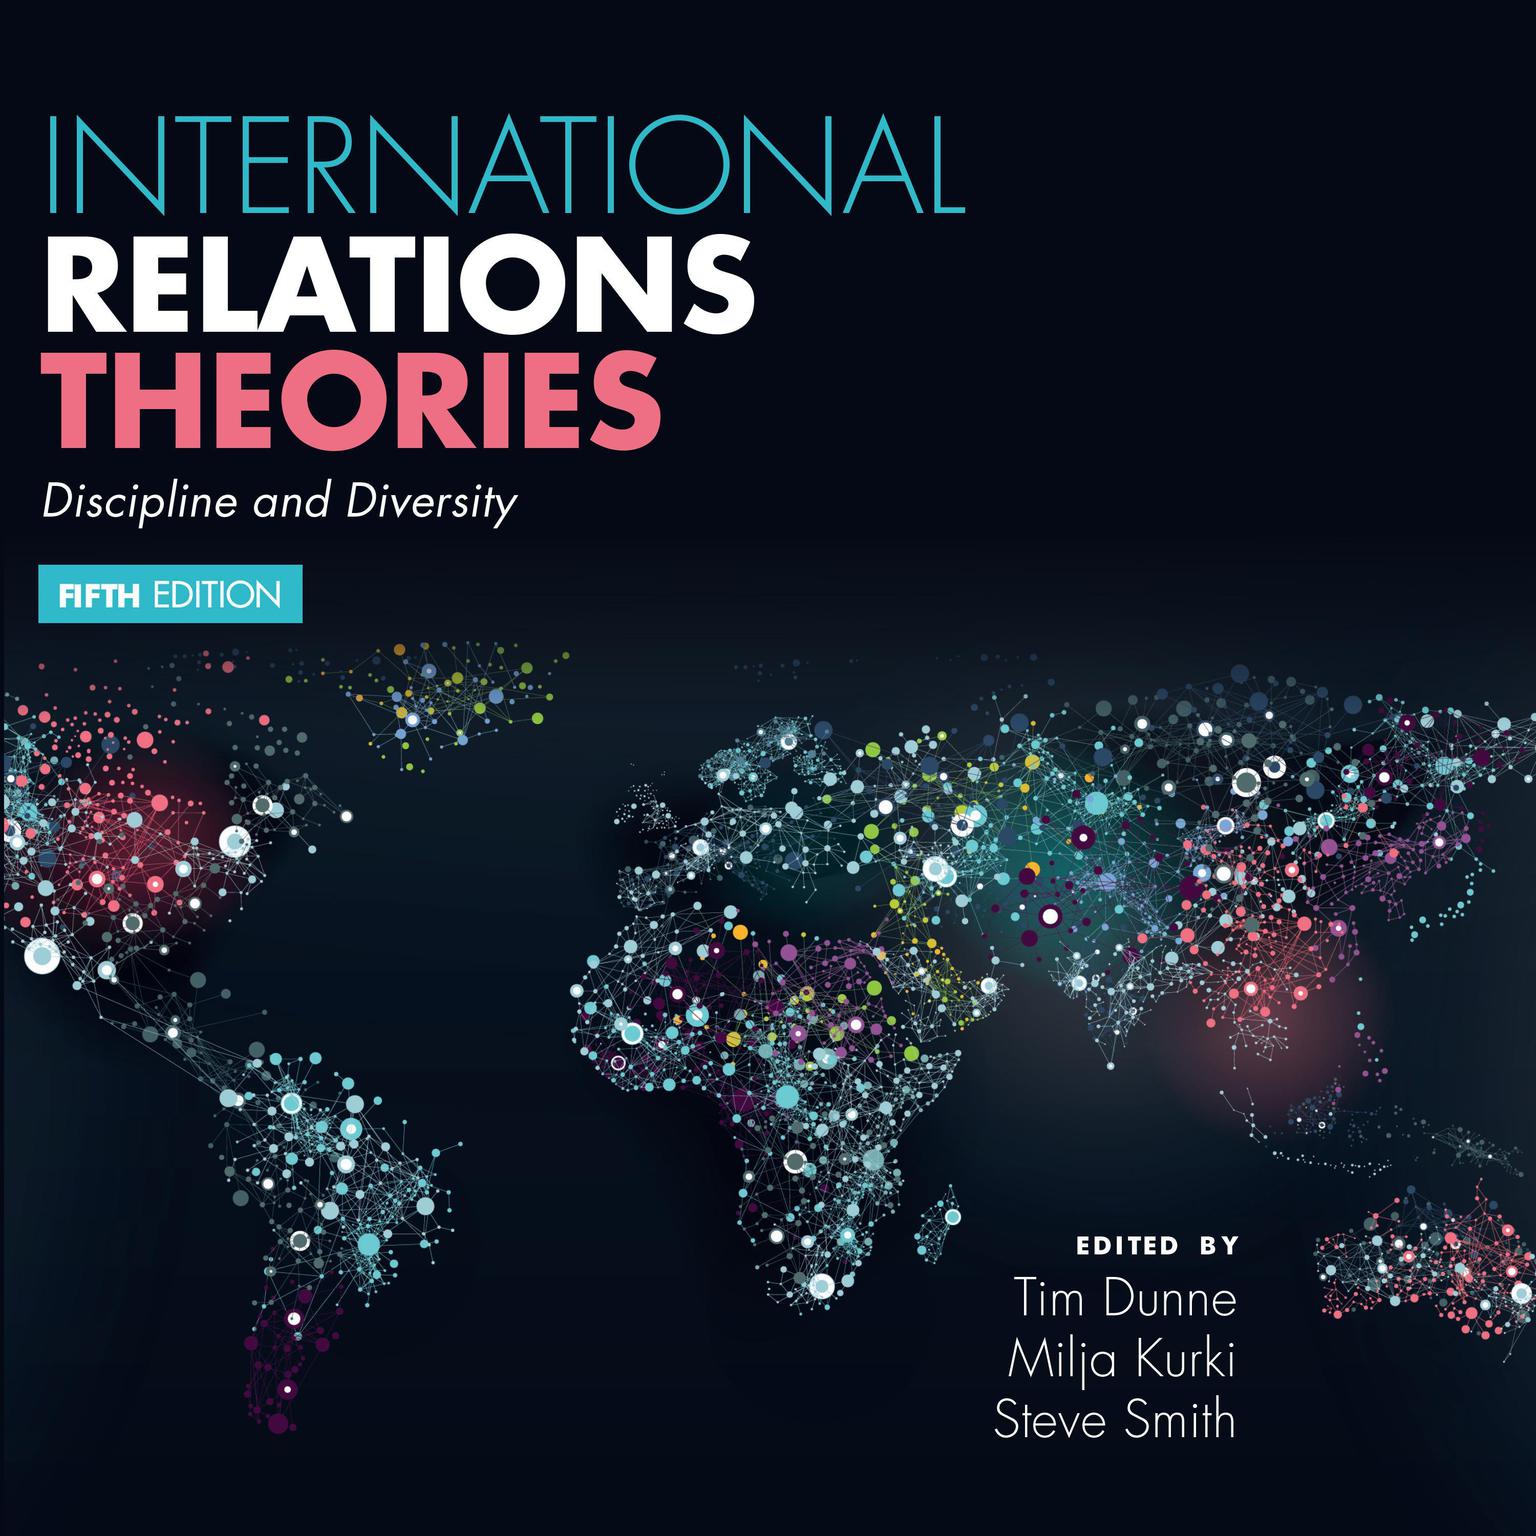 International Relations Theories: Discipline and Diversity 5th Edition Audiobook, by Tim Dunne